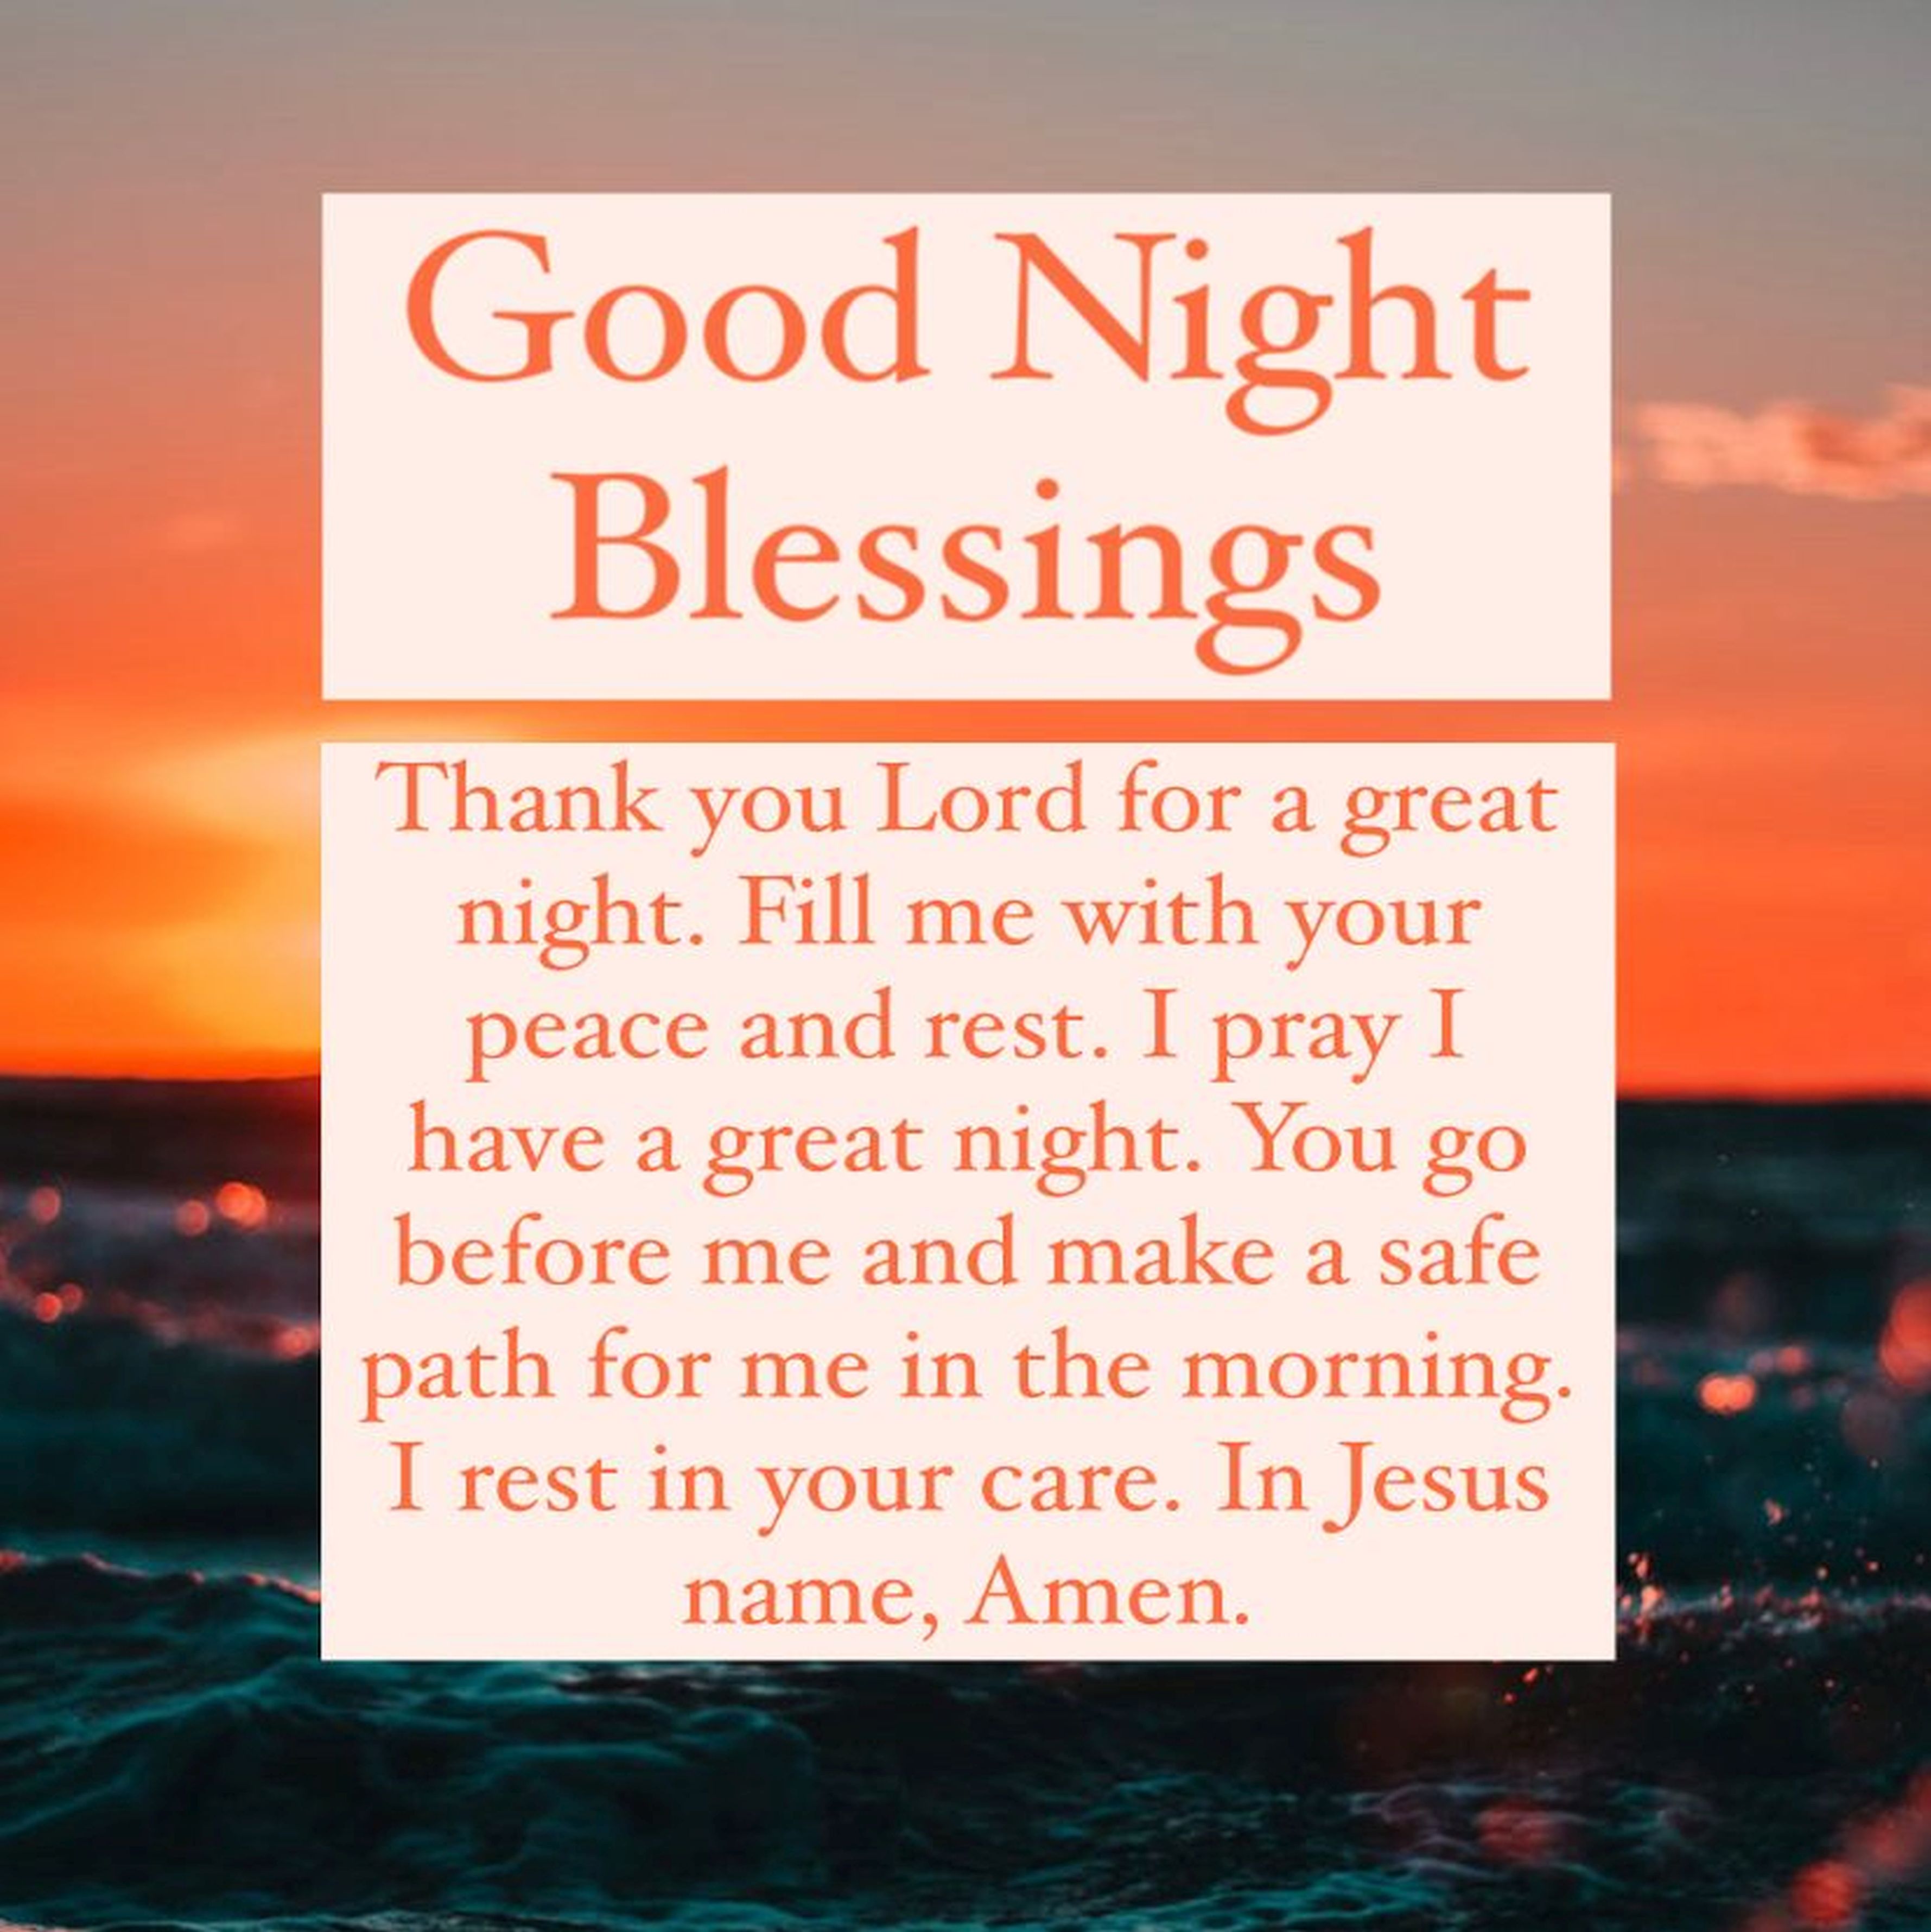 Good Night Blessings! May the Lord bless you and keep you safe💖